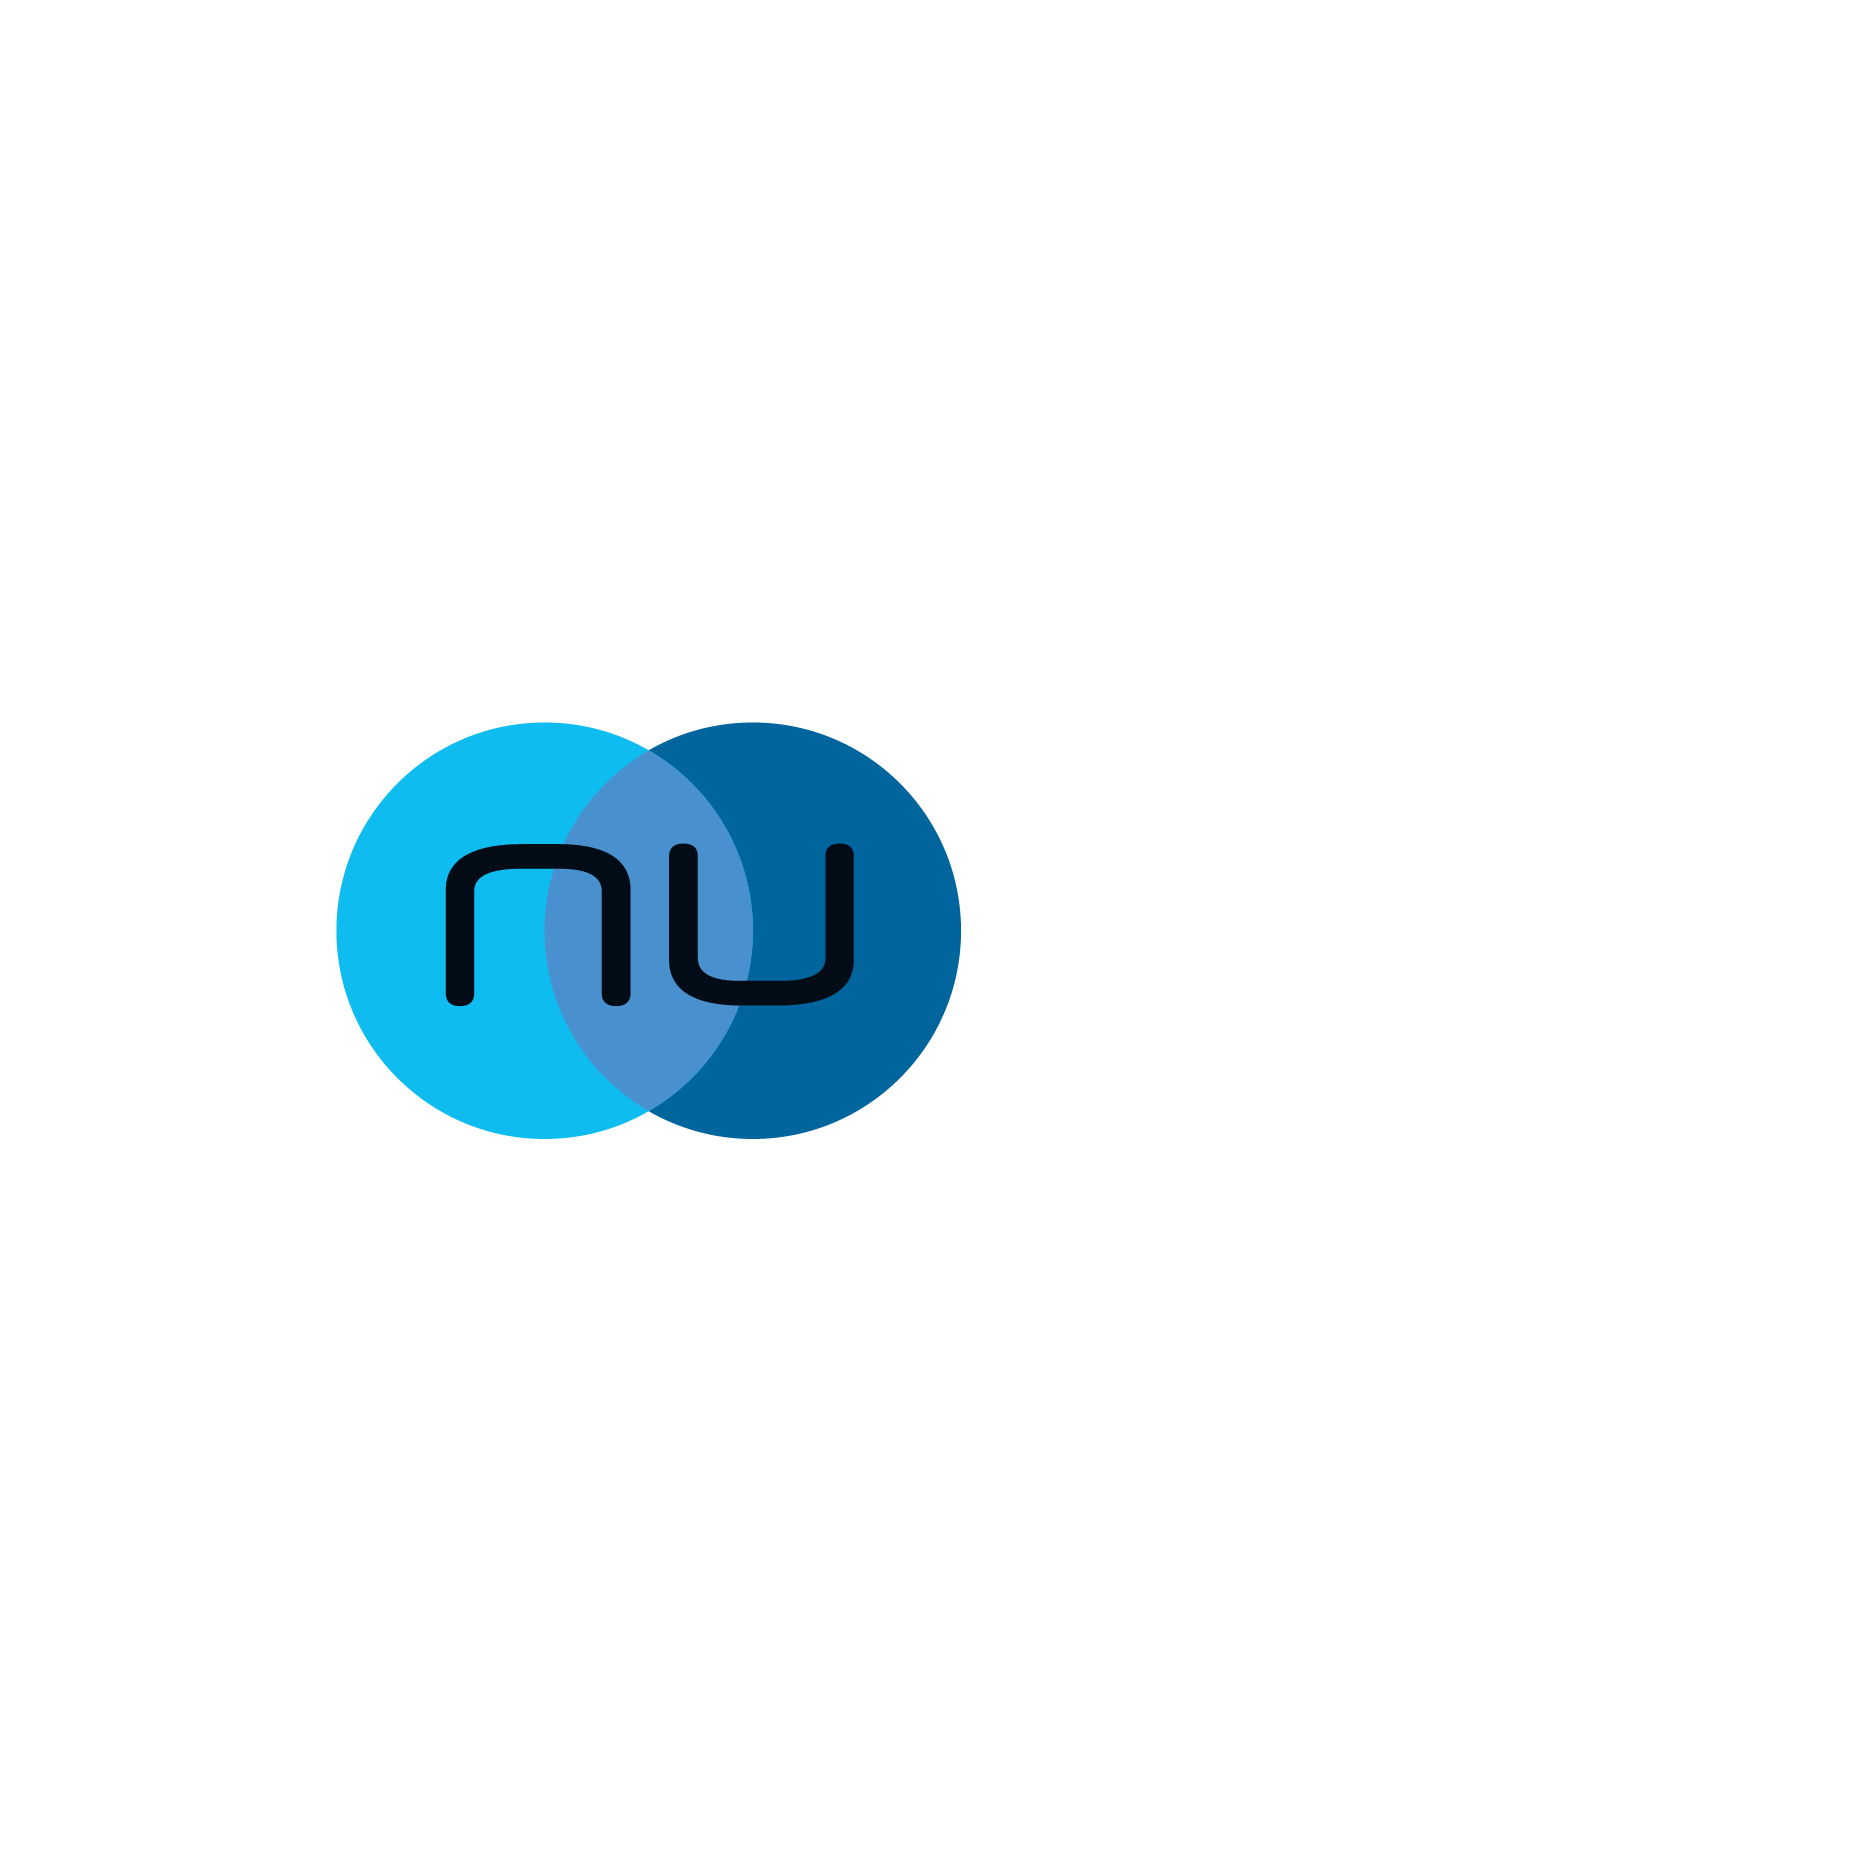 NuRAN Wireless in DRC | Rural Telecom Services | NuRAN Wireless - Mobile and Wireless Network Solutions